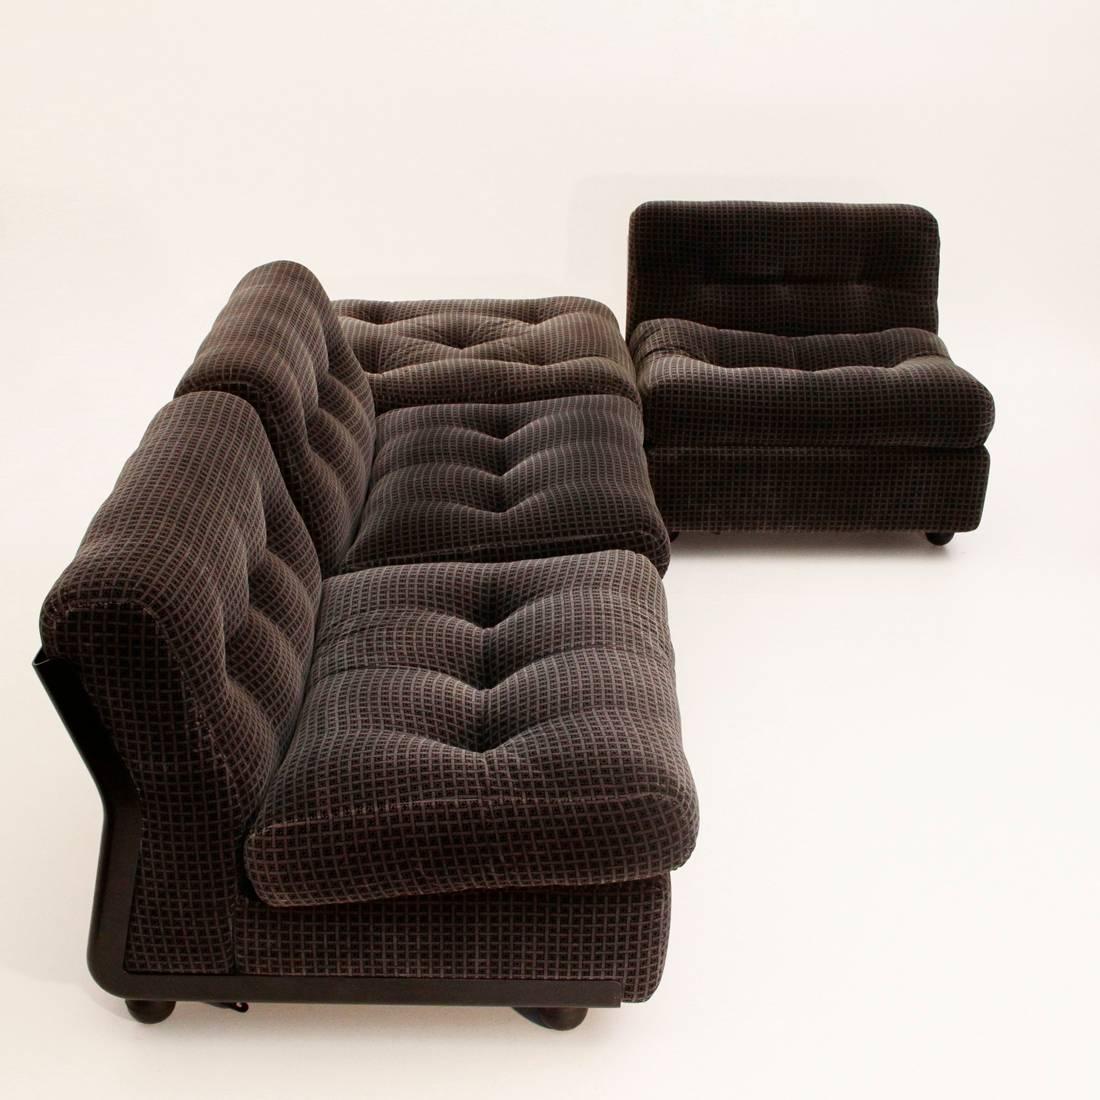 Set of three chairs and an ottoman
designed by Mario Bellini and produced by B & B Italy in the 1970s.
Structure in black Fiberlite, padded cushions and lined with original fabric of the time.
The seats can be hooked to each other.
Good general